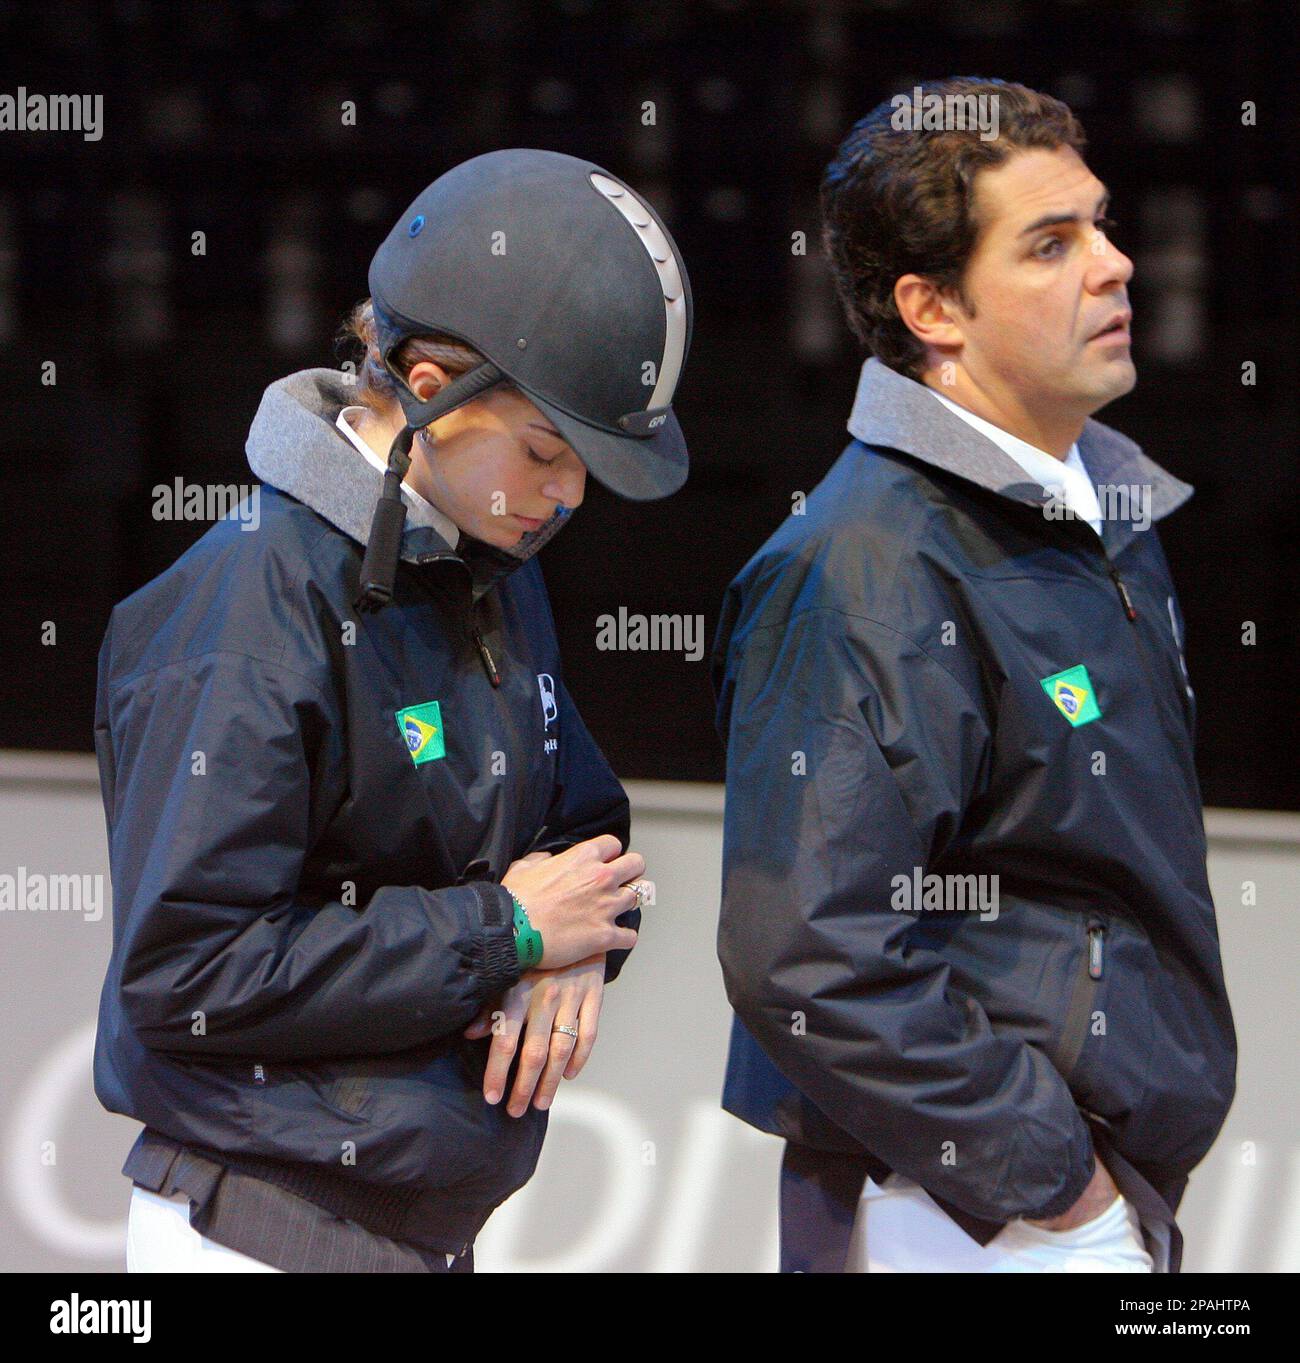 Greek rider Athina Miranda-Onassis, left, checks her watch as she and her  husband, Brazilian Alvaro Miranda, right, inspect the show-jumping course  prior to the Liebherr Prize event at the CSI Show Jumping